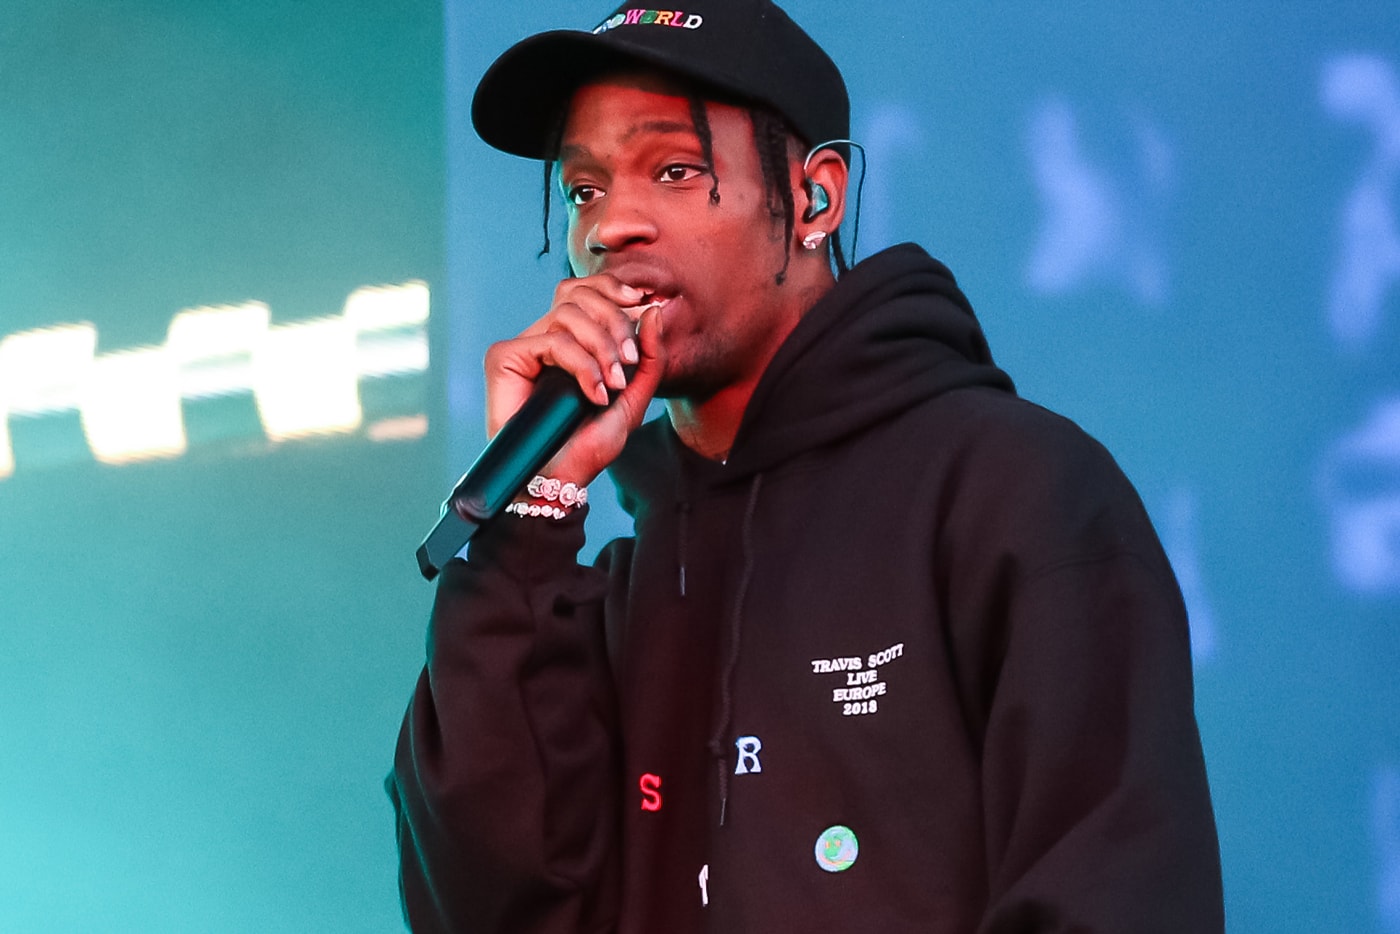 Travis Scott Surprise Astroworld Birthday Party Six Flags Kylie Jenner Stormi Califronia La Flame